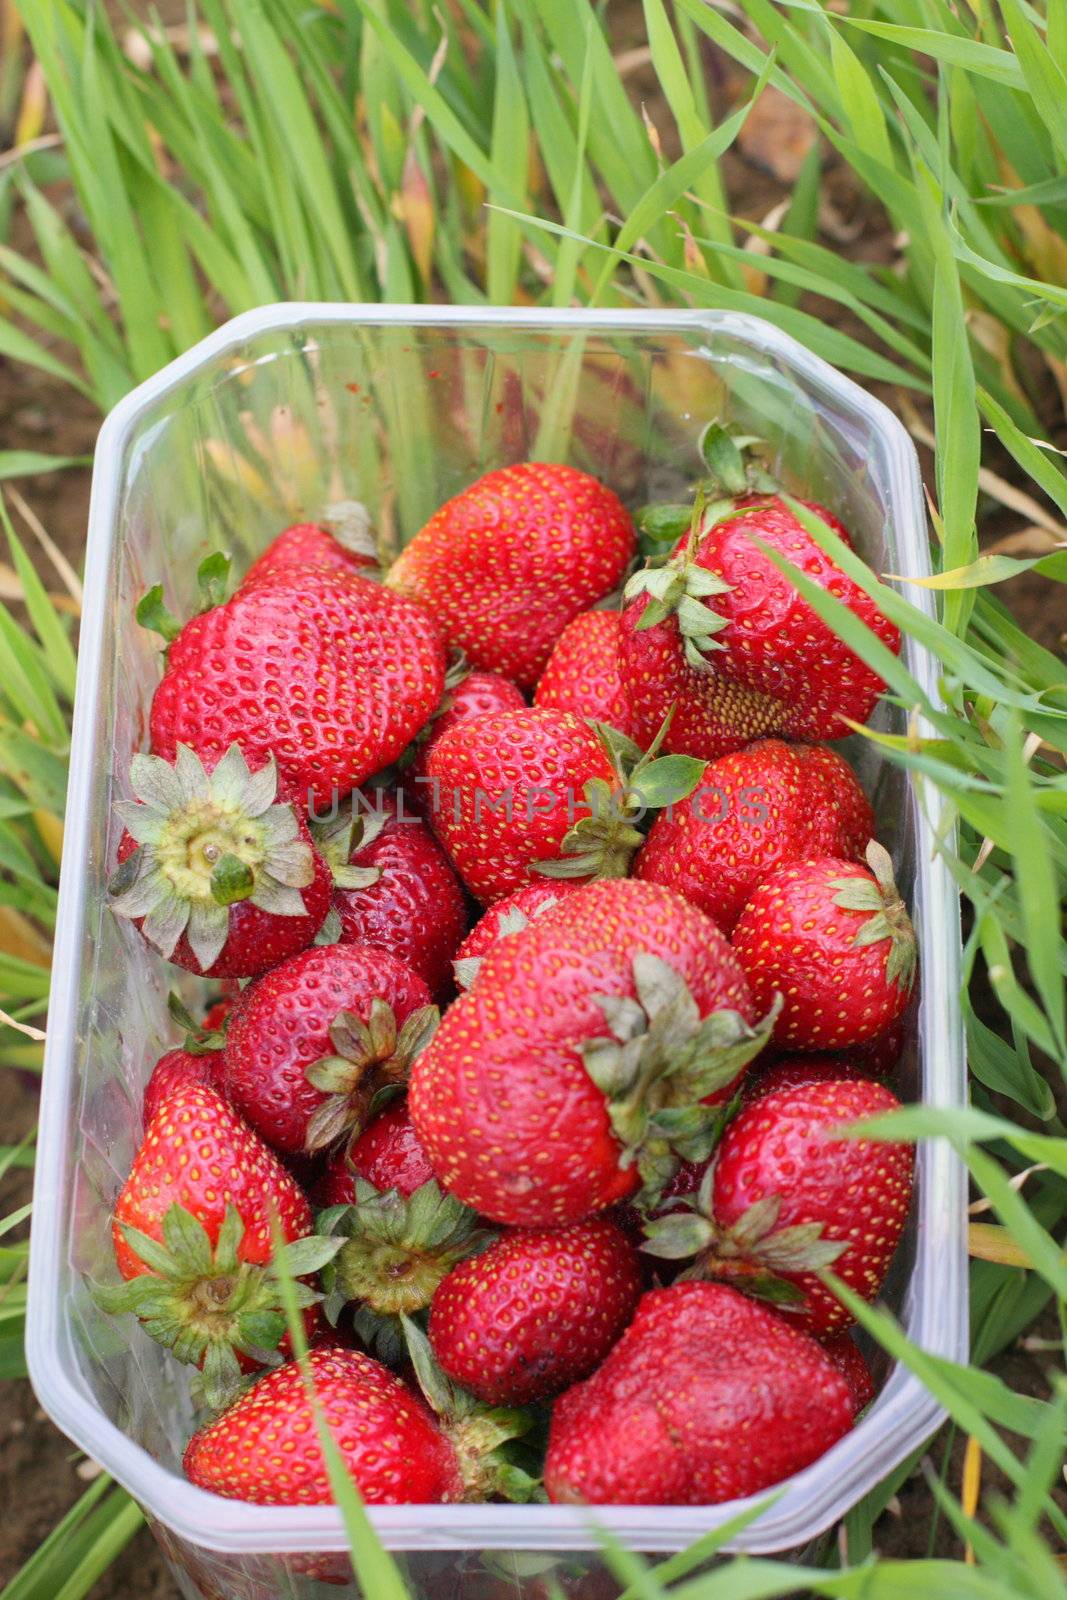 Strawberry, grass, fruit, packing, plastic